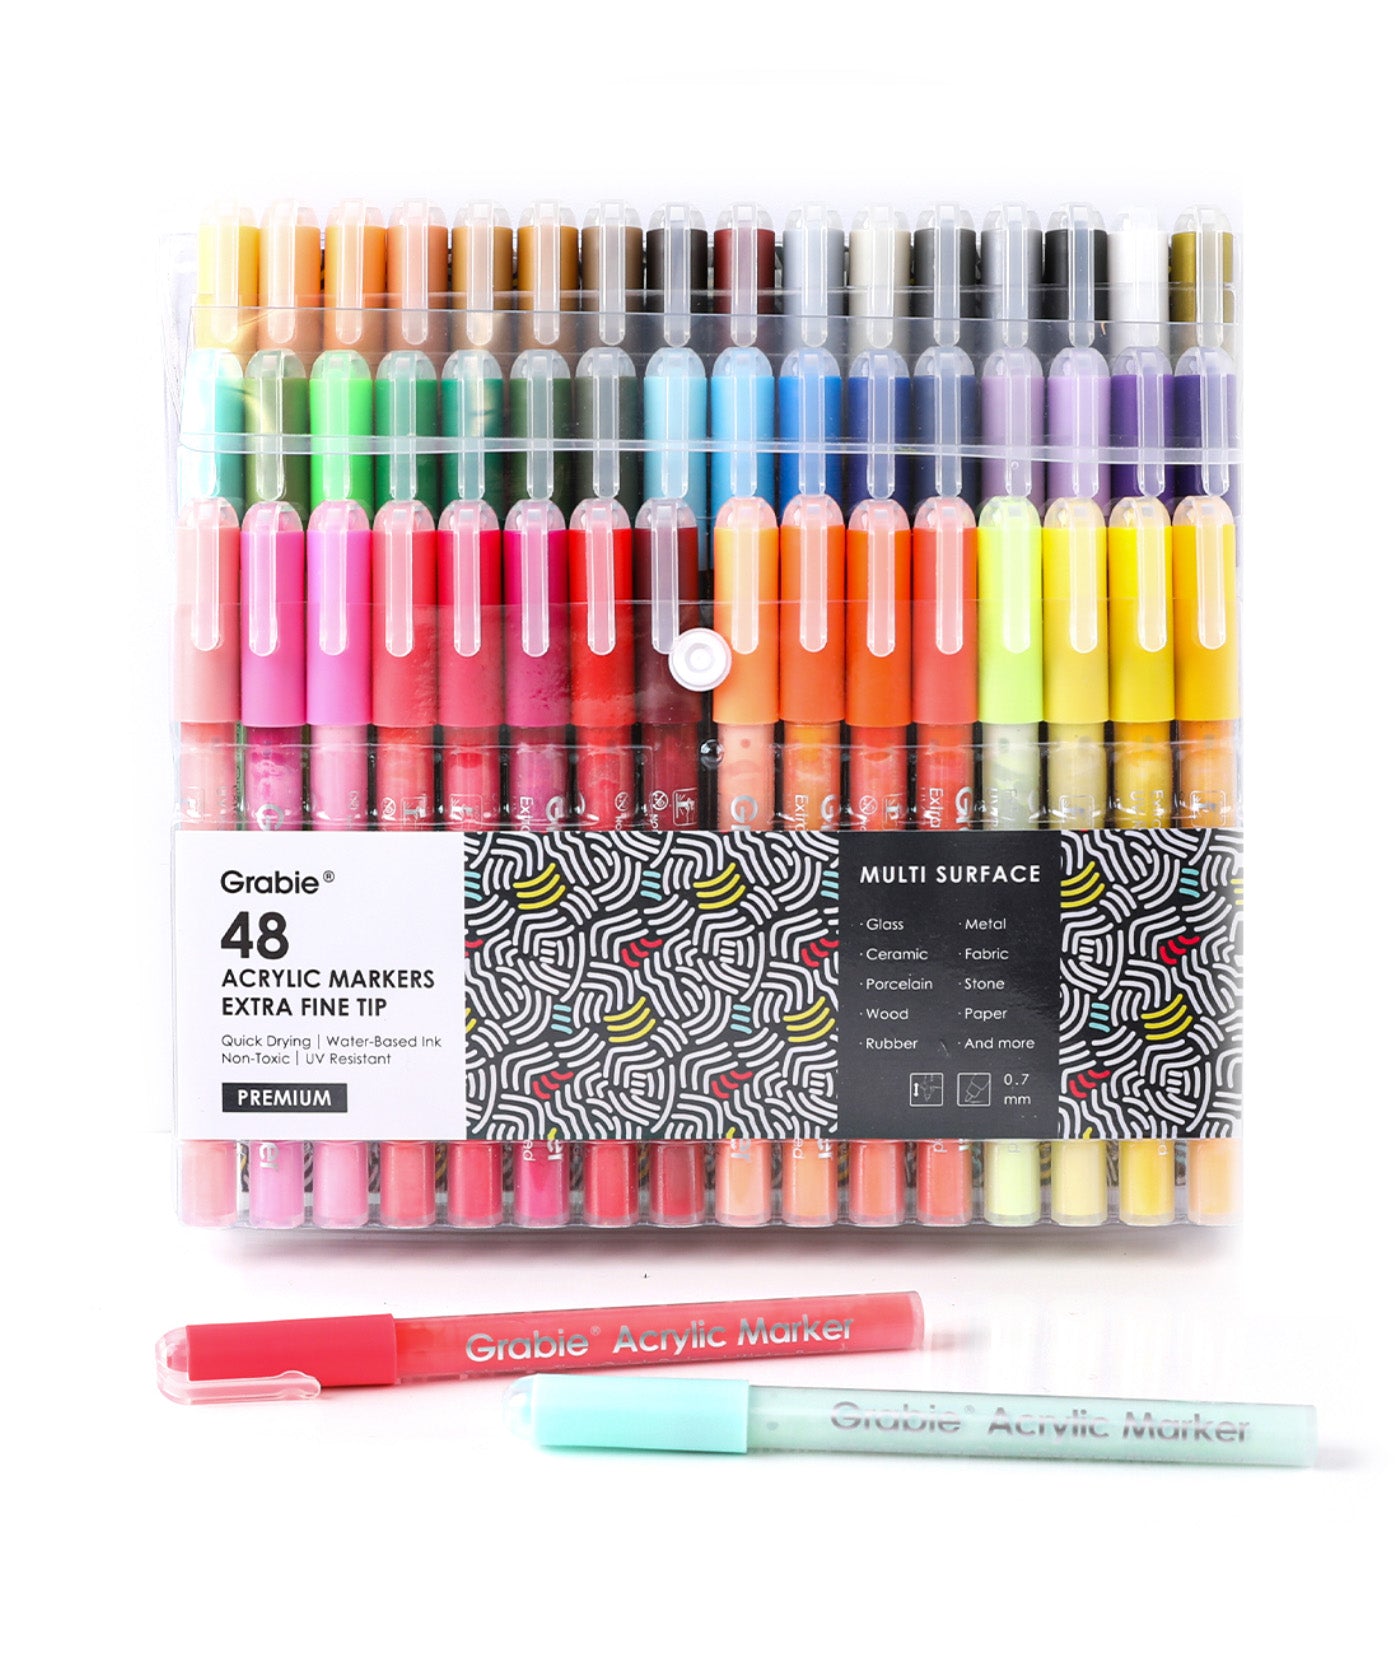 @grabieofficial these Grabie acrylic markers are so much fun to use! I, acrylic markers